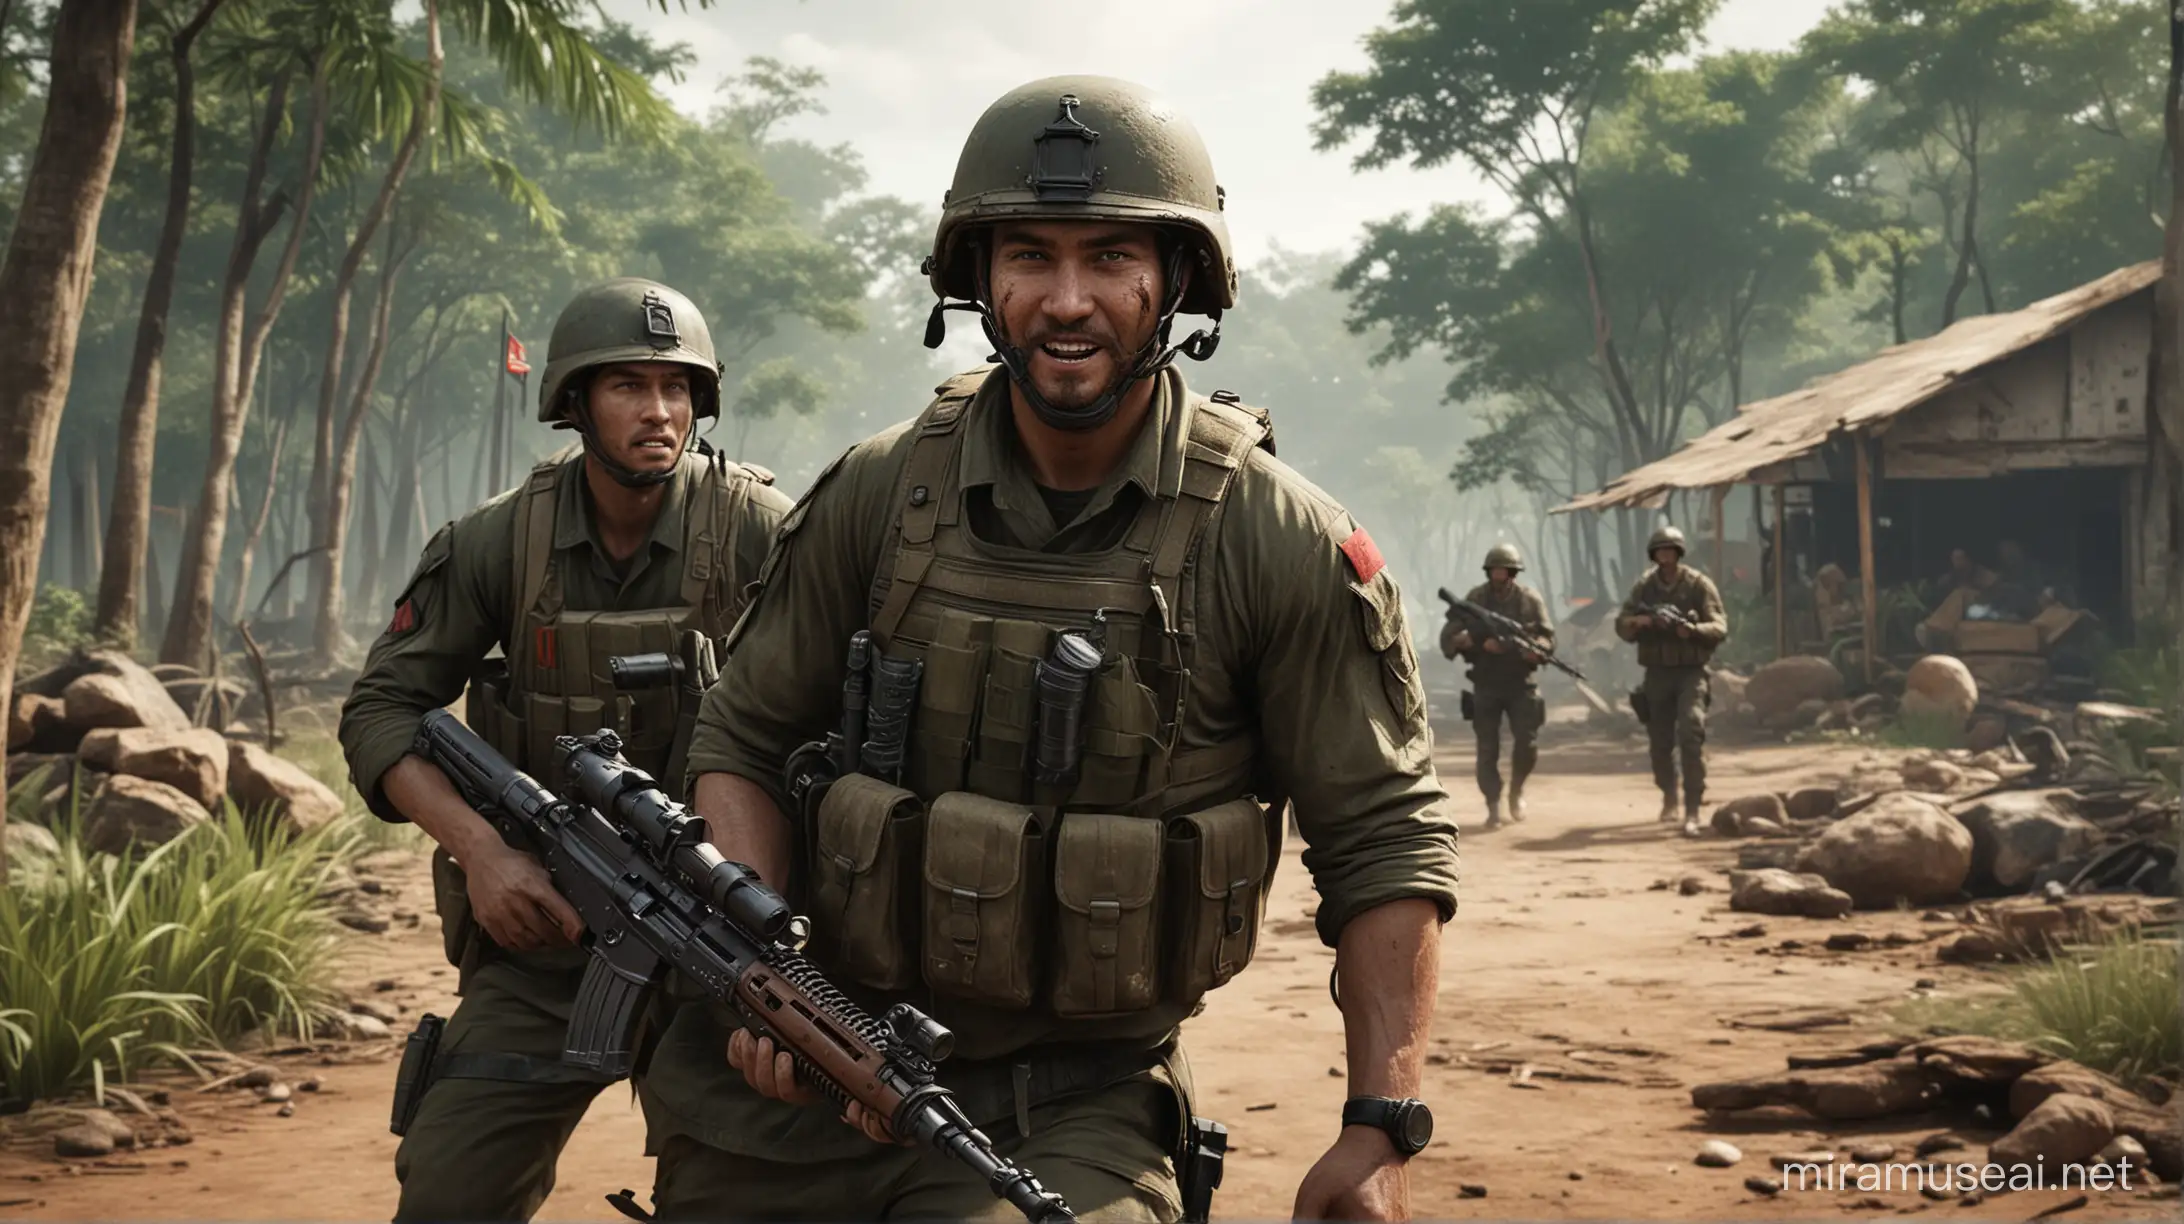 Incursion Red River is a tactical first-person extraction shooter set in war-torn modern day Vietnam zoom in face VIETNAMESE solider and smile